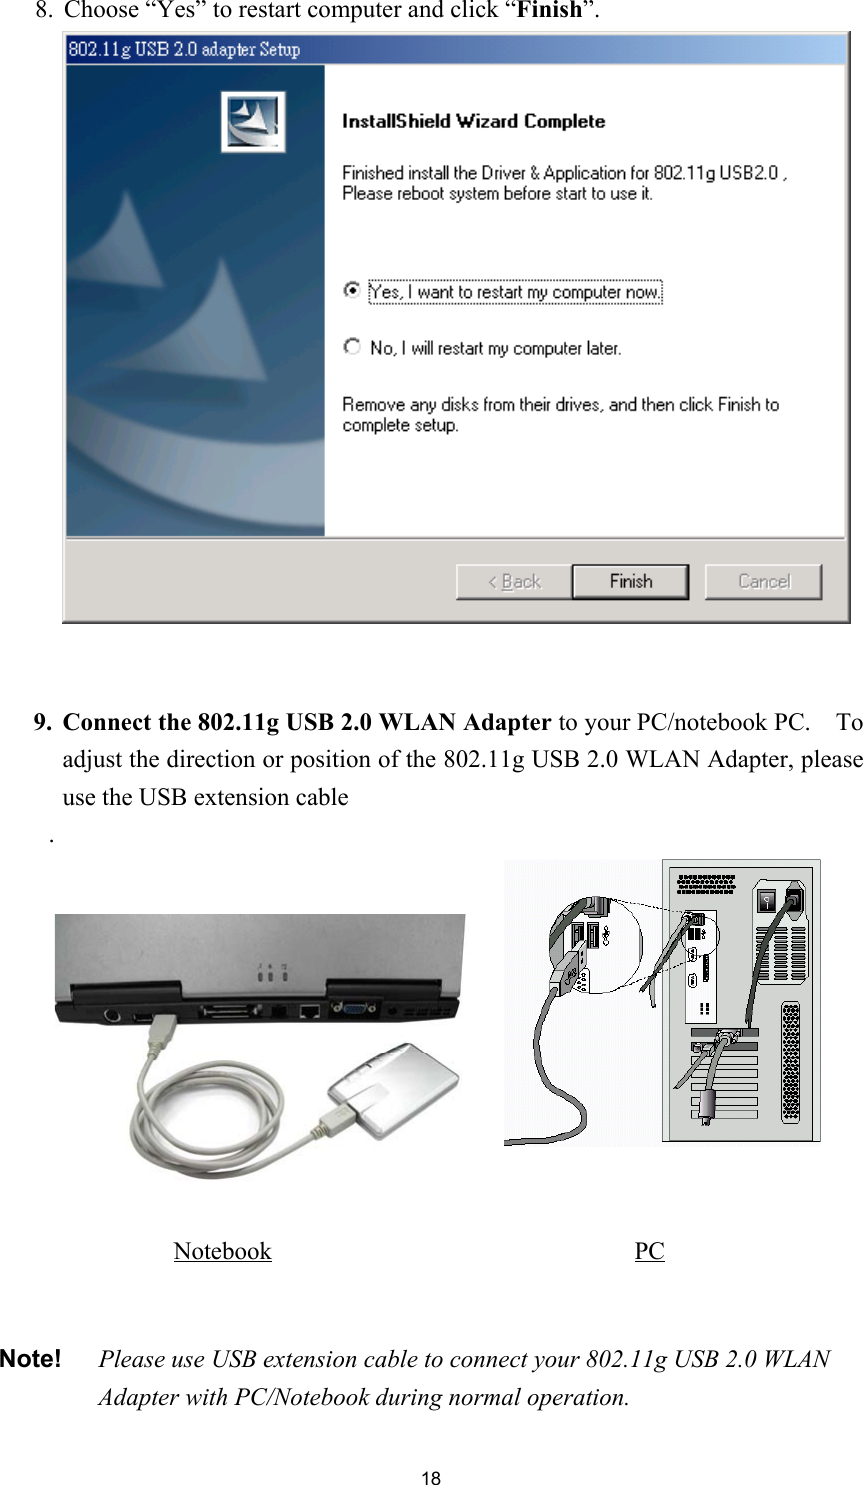 188. Choose “Yes” to restart computer and click “Finish”.9. Connect the 802.11g USB 2.0 WLAN Adapter to your PC/notebook PC.    Toadjust the direction or position of the 802.11g USB 2.0 WLAN Adapter, pleaseuse the USB extension cable.              Notebook                             PCNote! Please use USB extension cable to connect your 802.11g USB 2.0 WLANAdapter with PC/Notebook during normal operation.